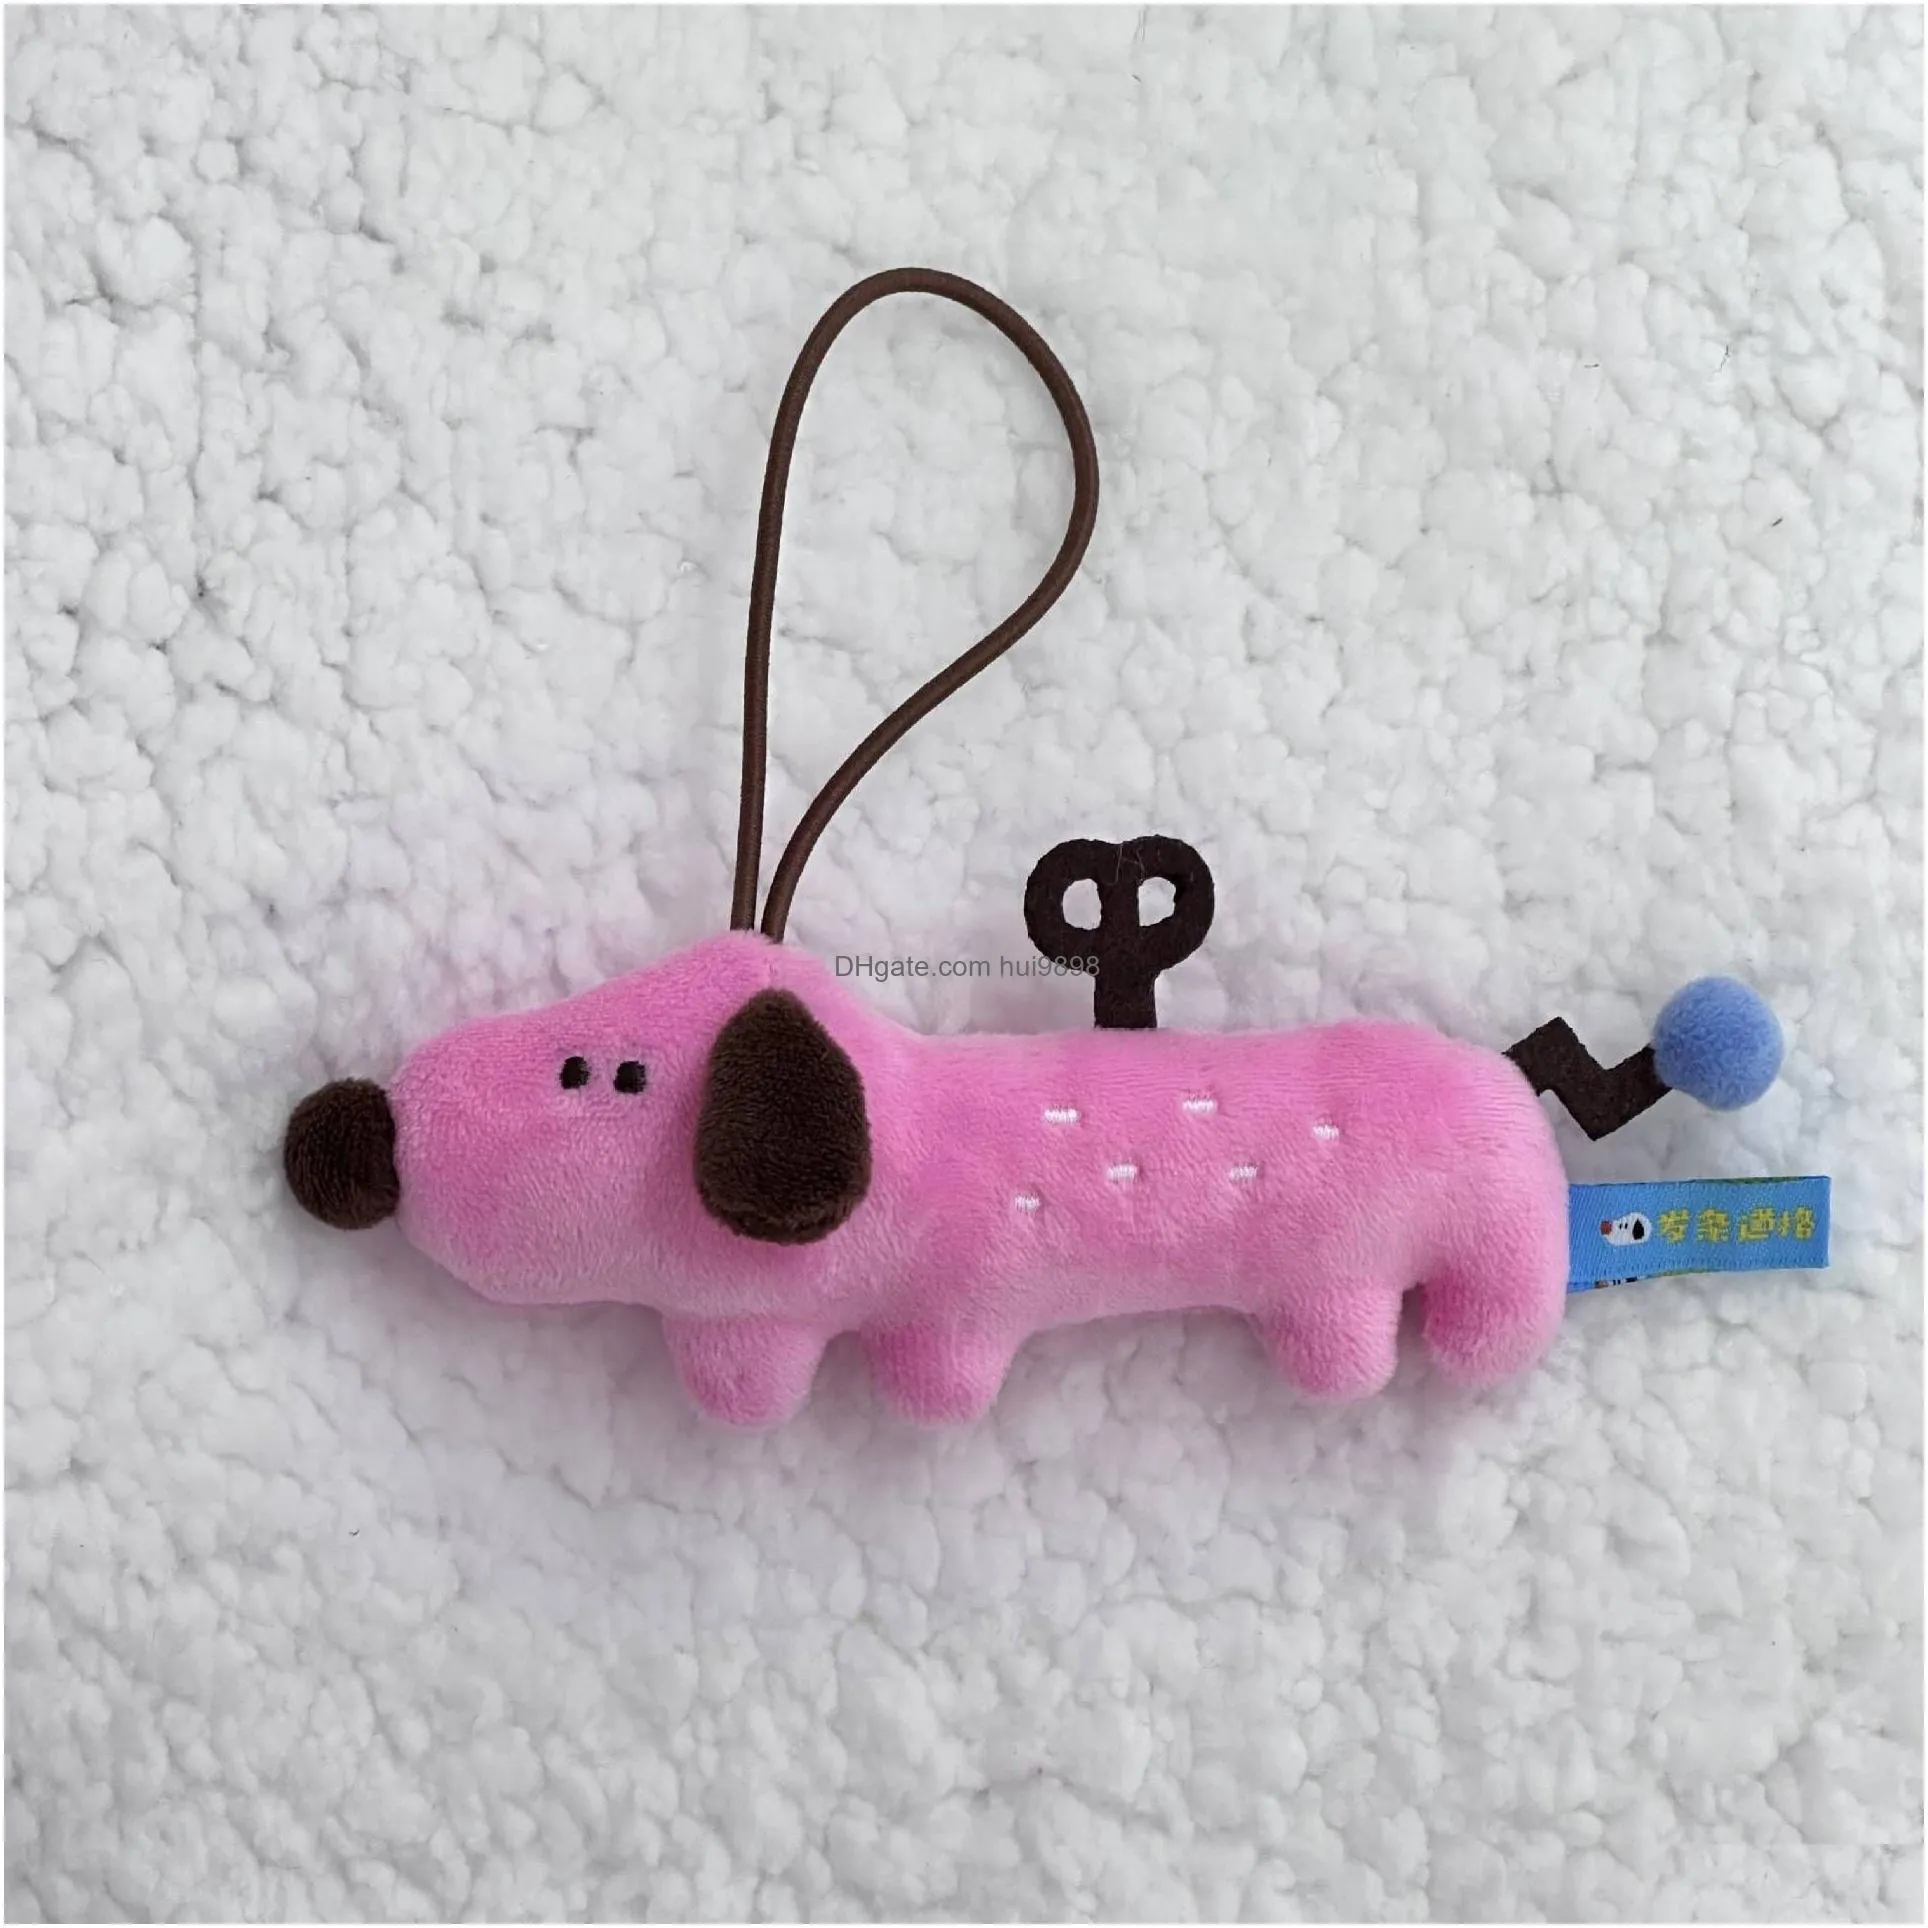 cartoon cute color dopamine puppy plush pendant keychain doll girl heart gift bag pendant childrens gift dhs/ups